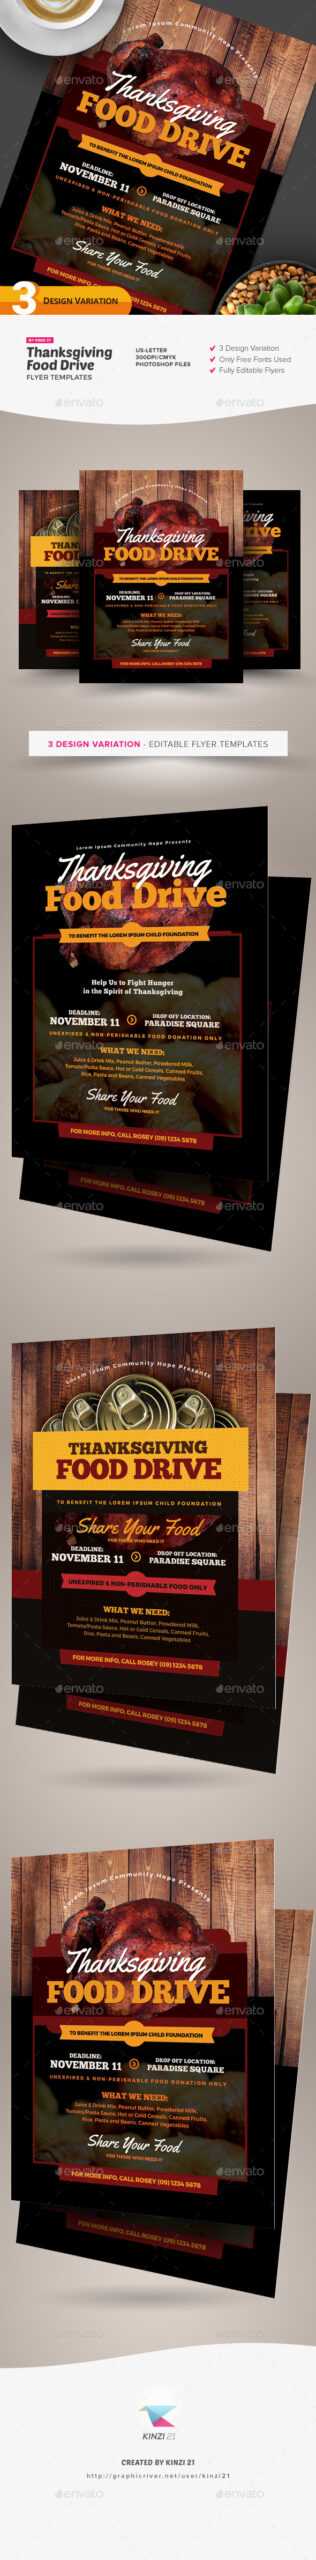 Food Bank Graphics, Designs & Templates From Graphicriver Regarding Food Drive Flyer Template